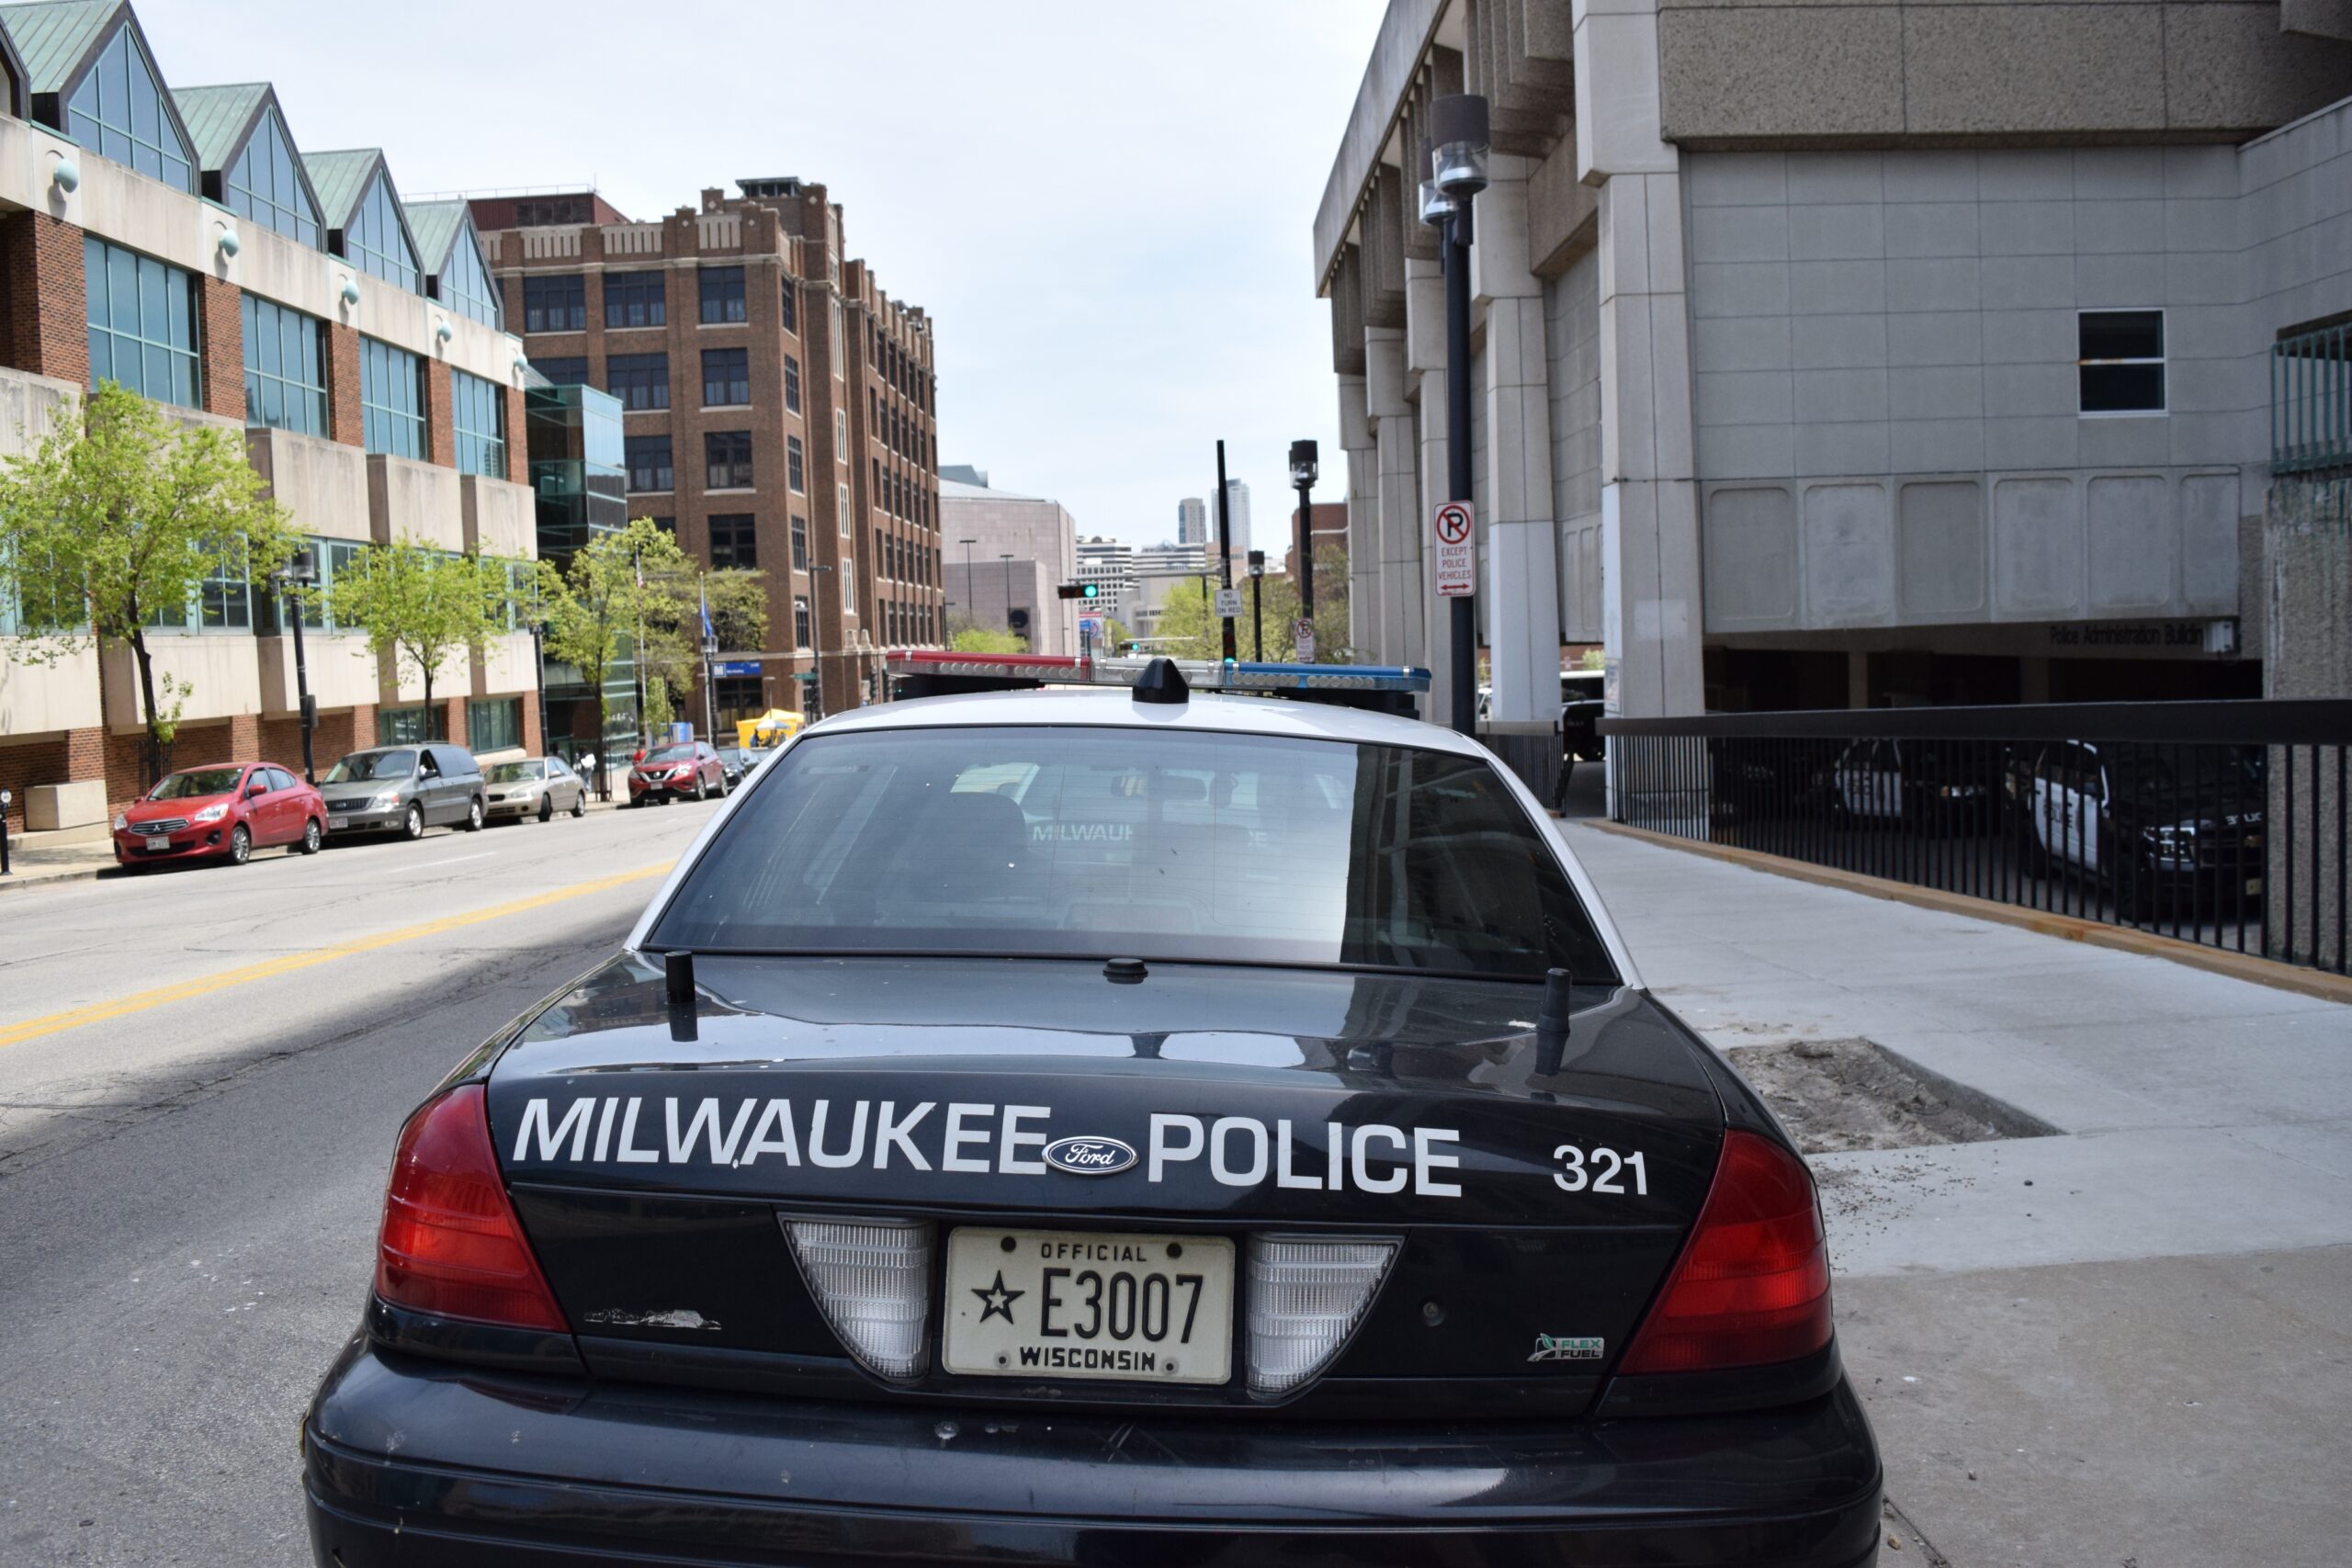 Suspect arrested after shots fired at Milwaukee police station